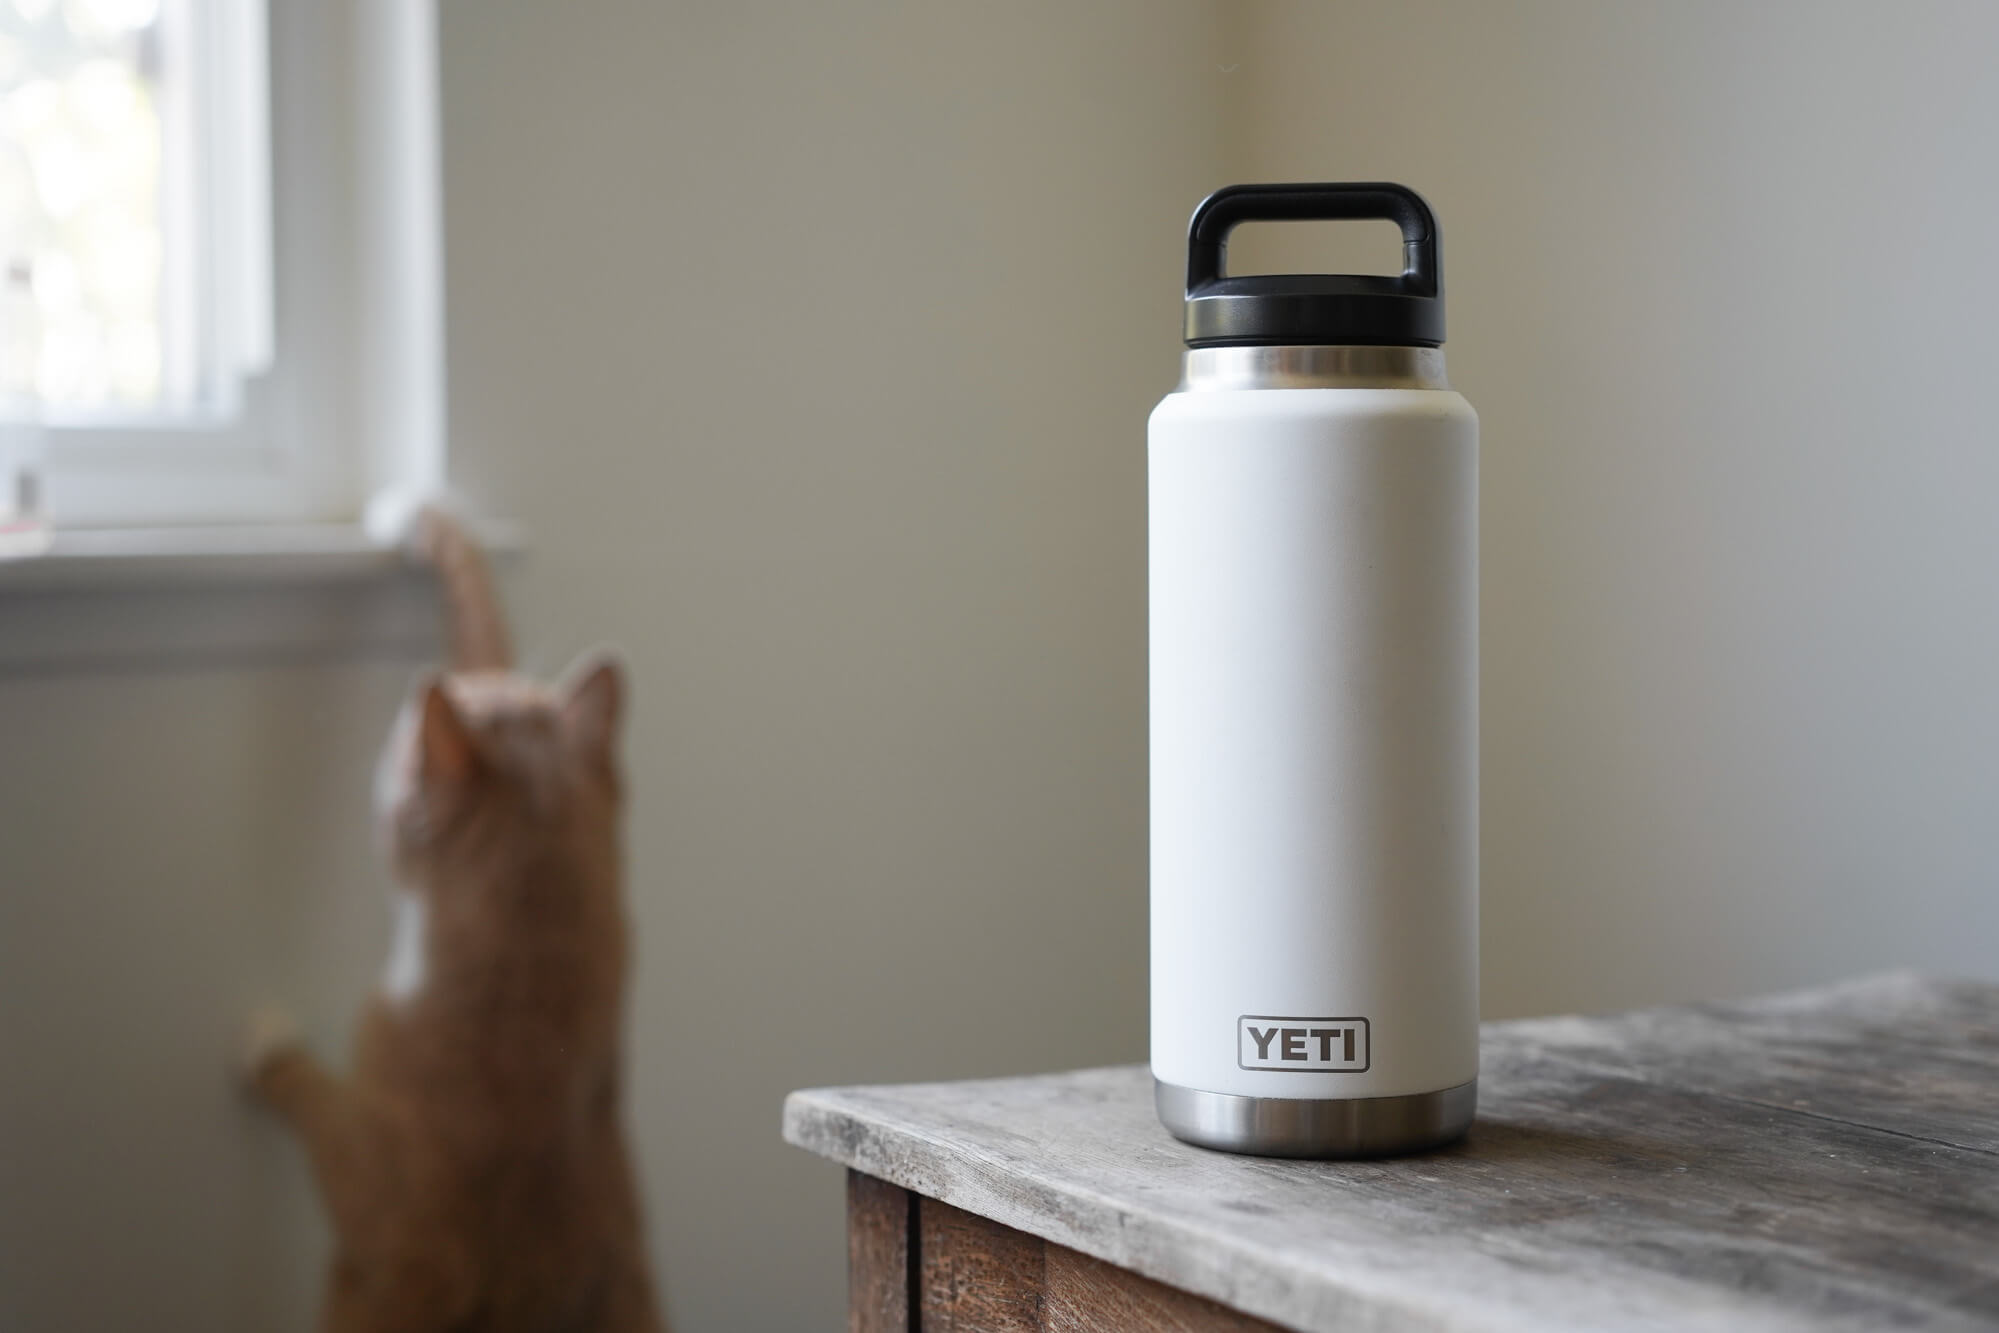 Hydro Flask Vs Yeti: Which Brand Is BETTER?